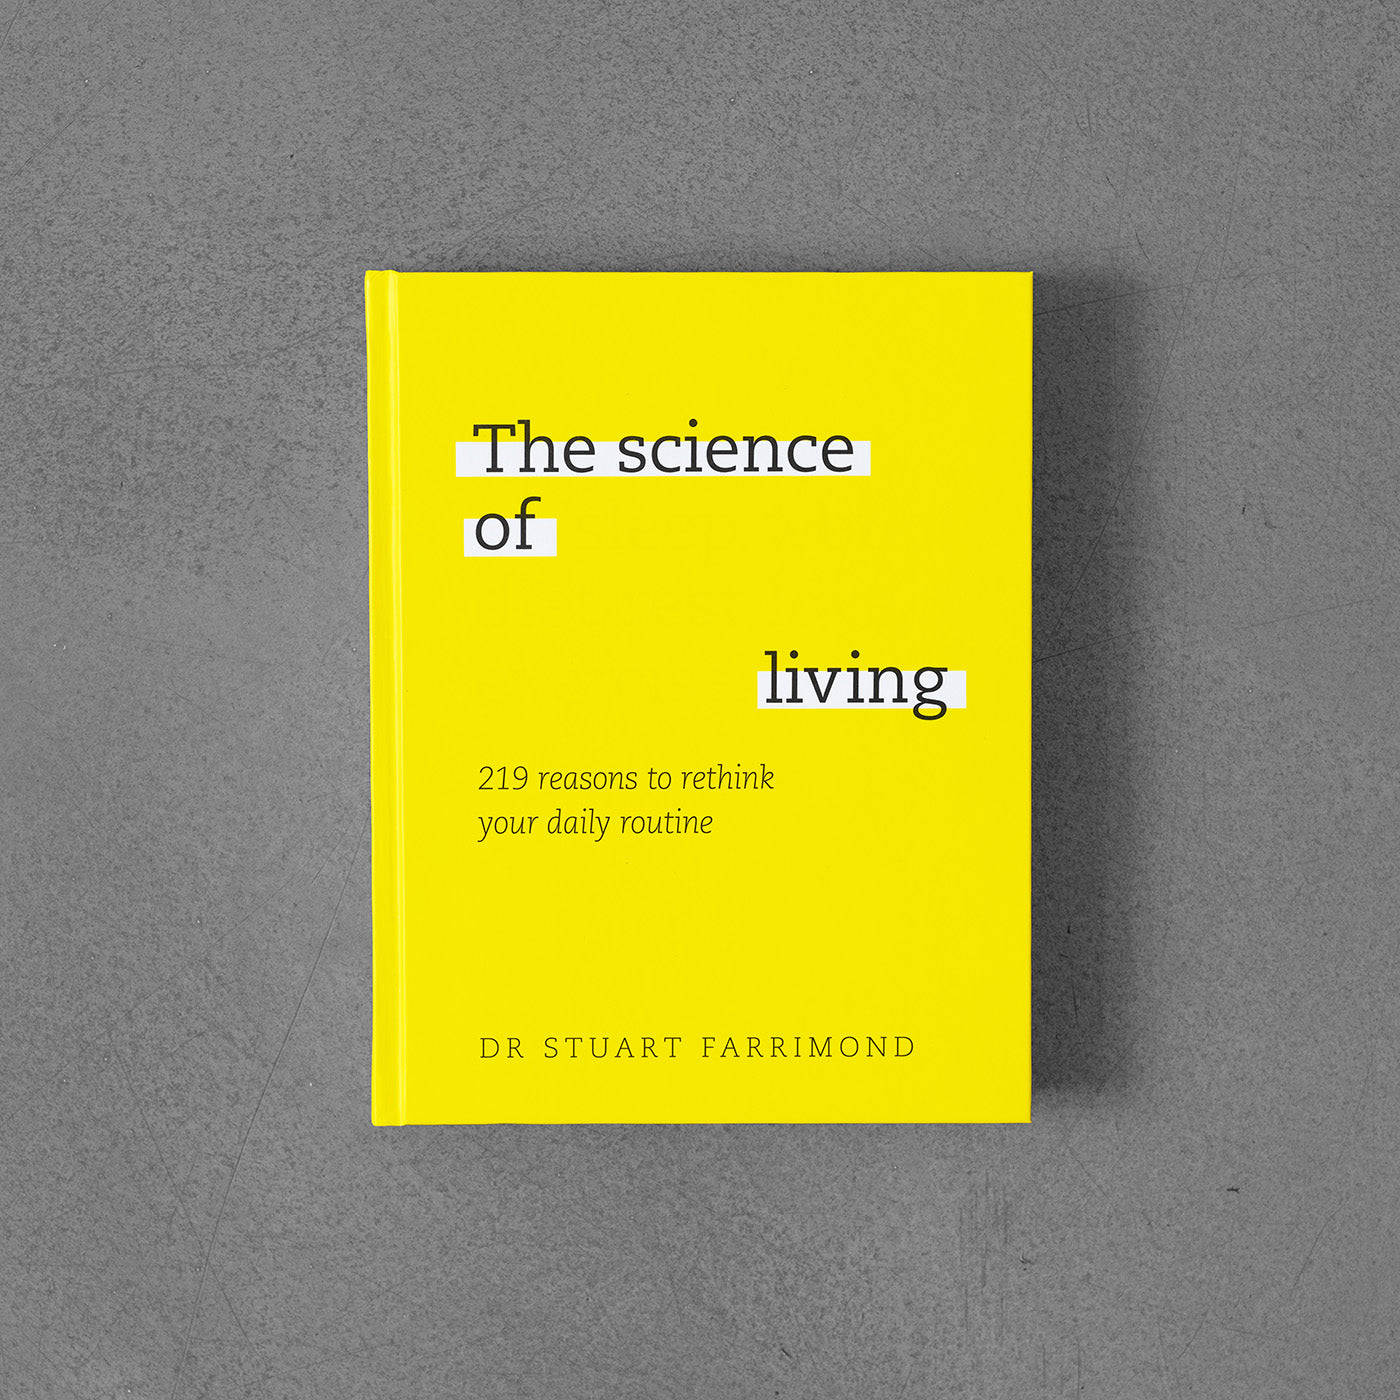 Science of Living: 219 reasons to rethink your daily routine